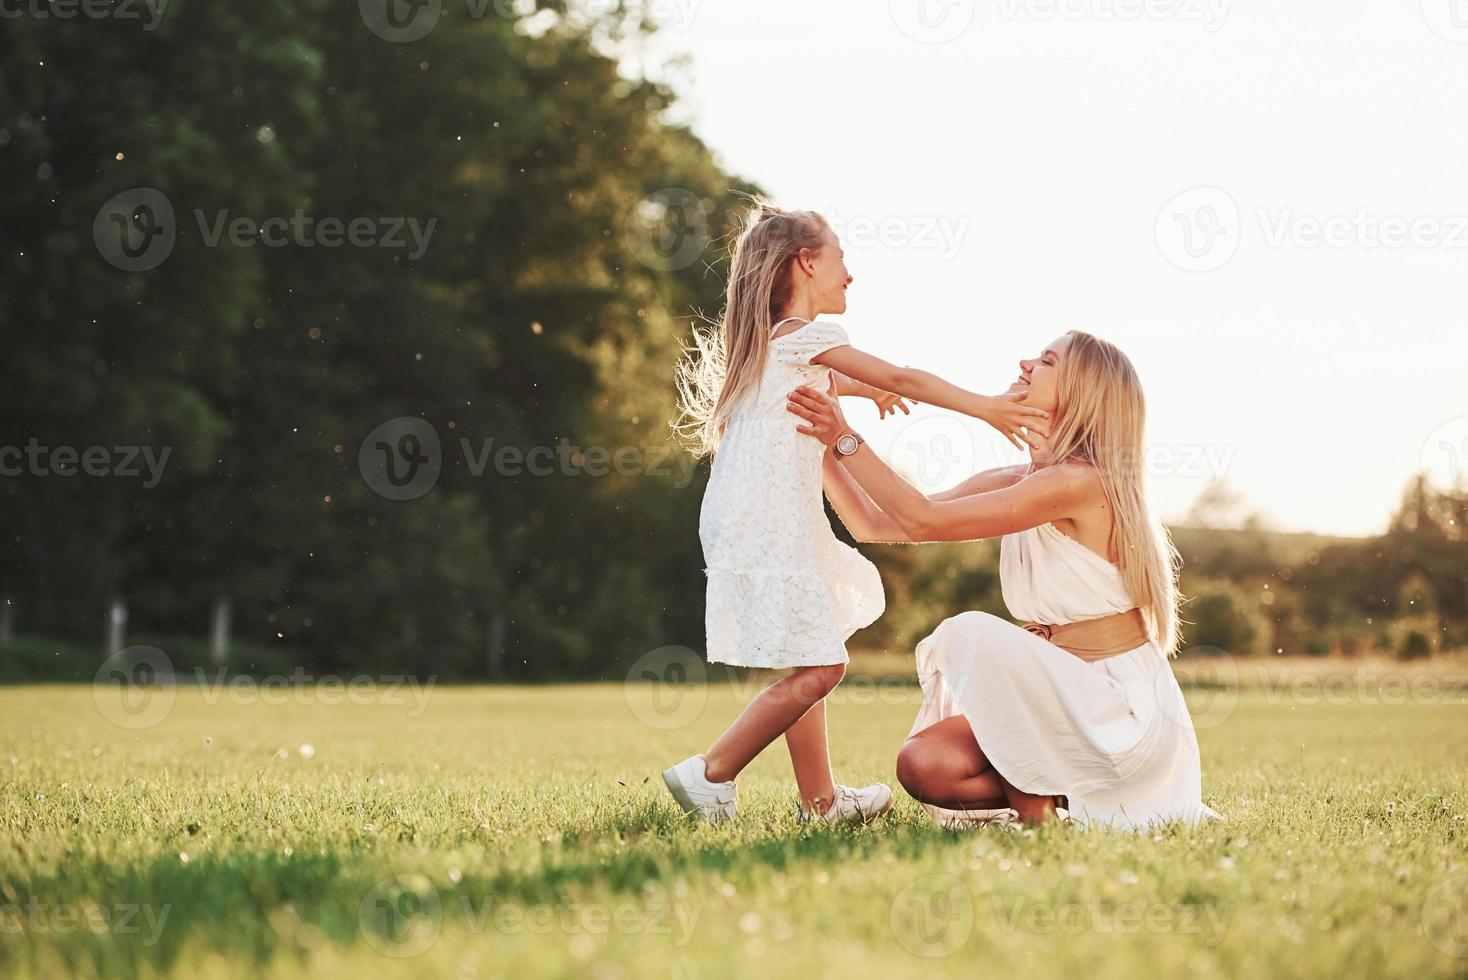 That's so cute. Mother and daughter enjoying weekend together by walking outdoors in the field. Beautiful nature photo